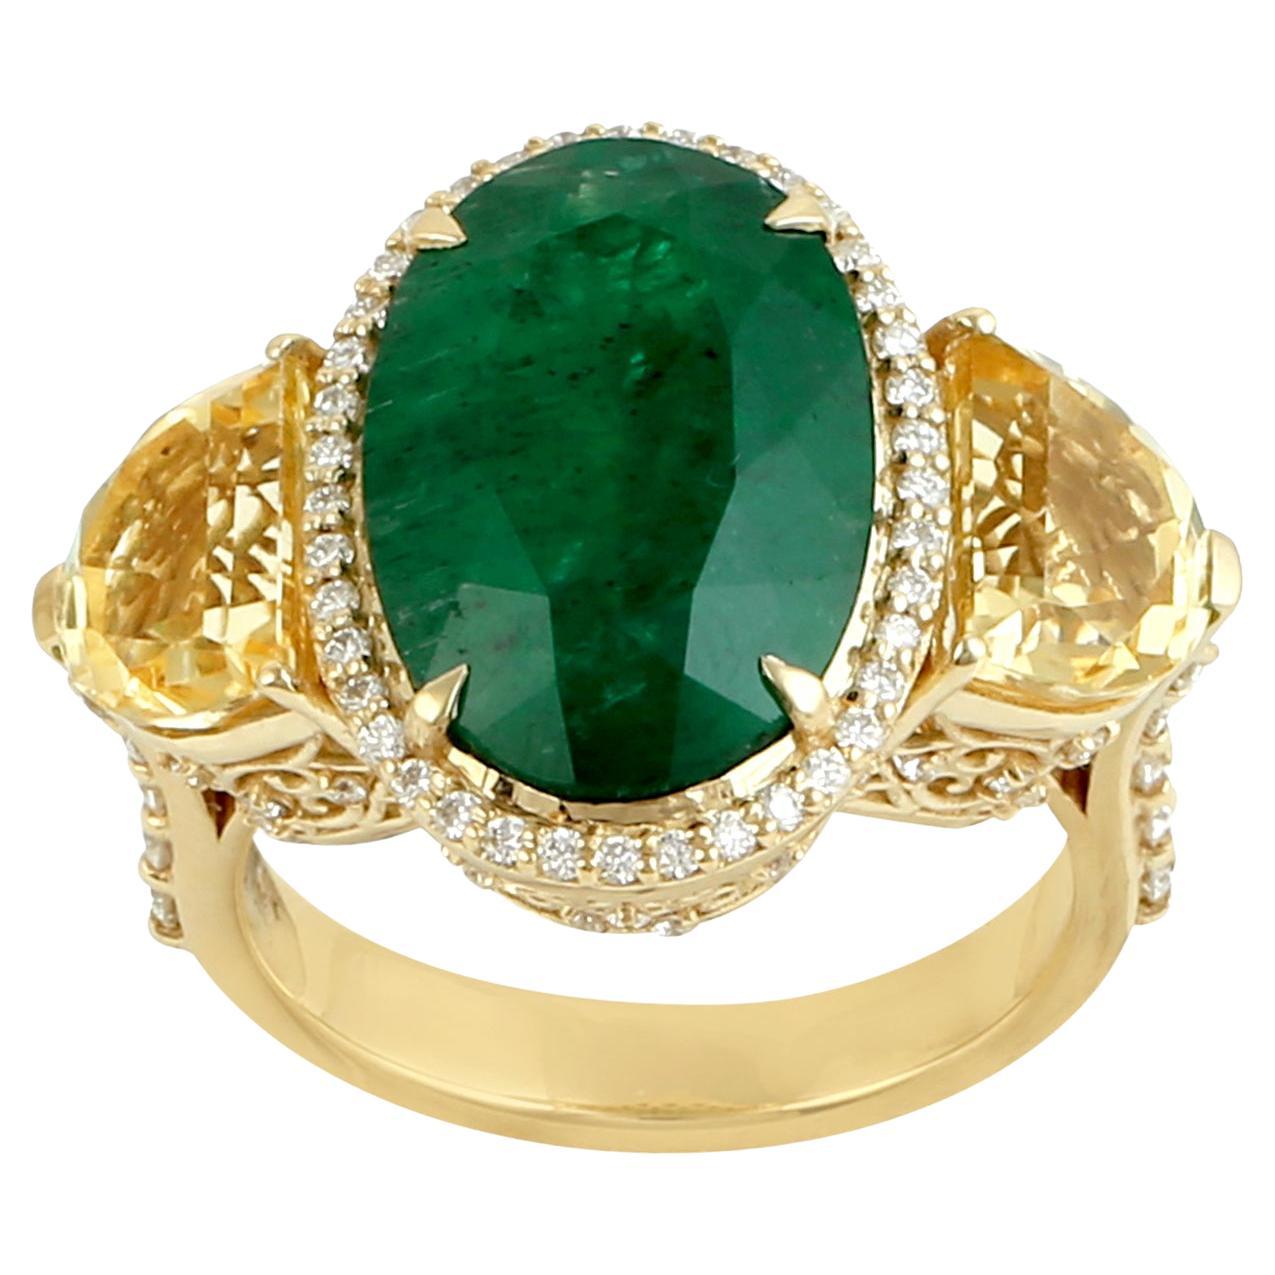 Oval Shaped Zambian Emerald Cocktail Ring With Citrine For Sale